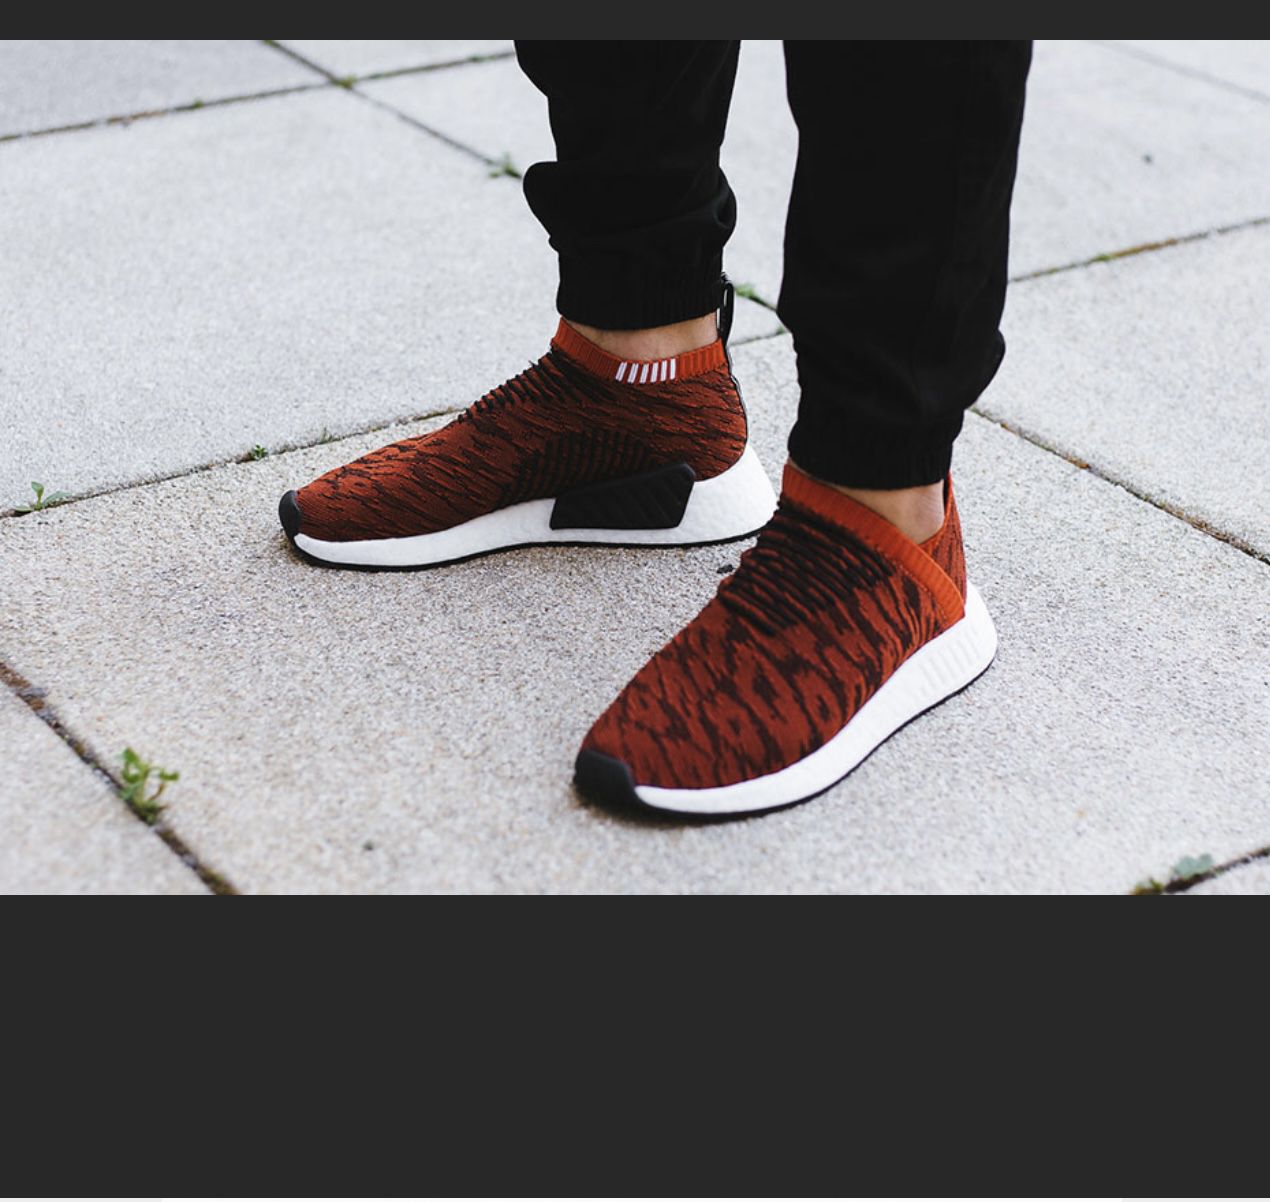 At bidrage Engager shampoo Adidas Originals NMD CS2 Primeknit Sneaker Red Glitch for Sale in Los  Angeles, CA - OfferUp